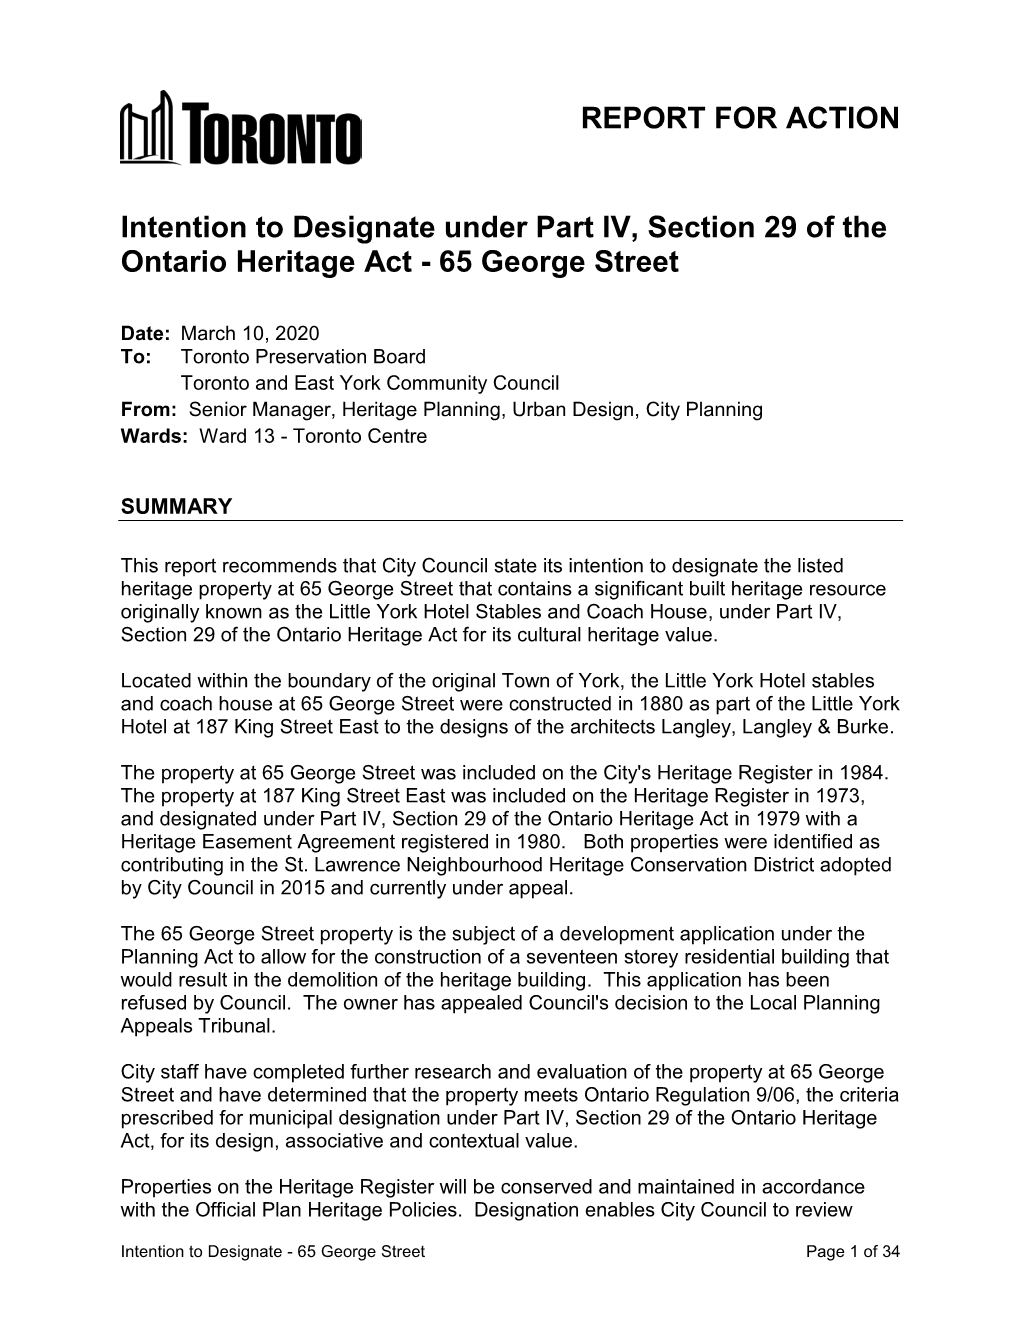 Intention to Designate Under Part IV, Section 29 of the Ontario Heritage Act - 65 George Street